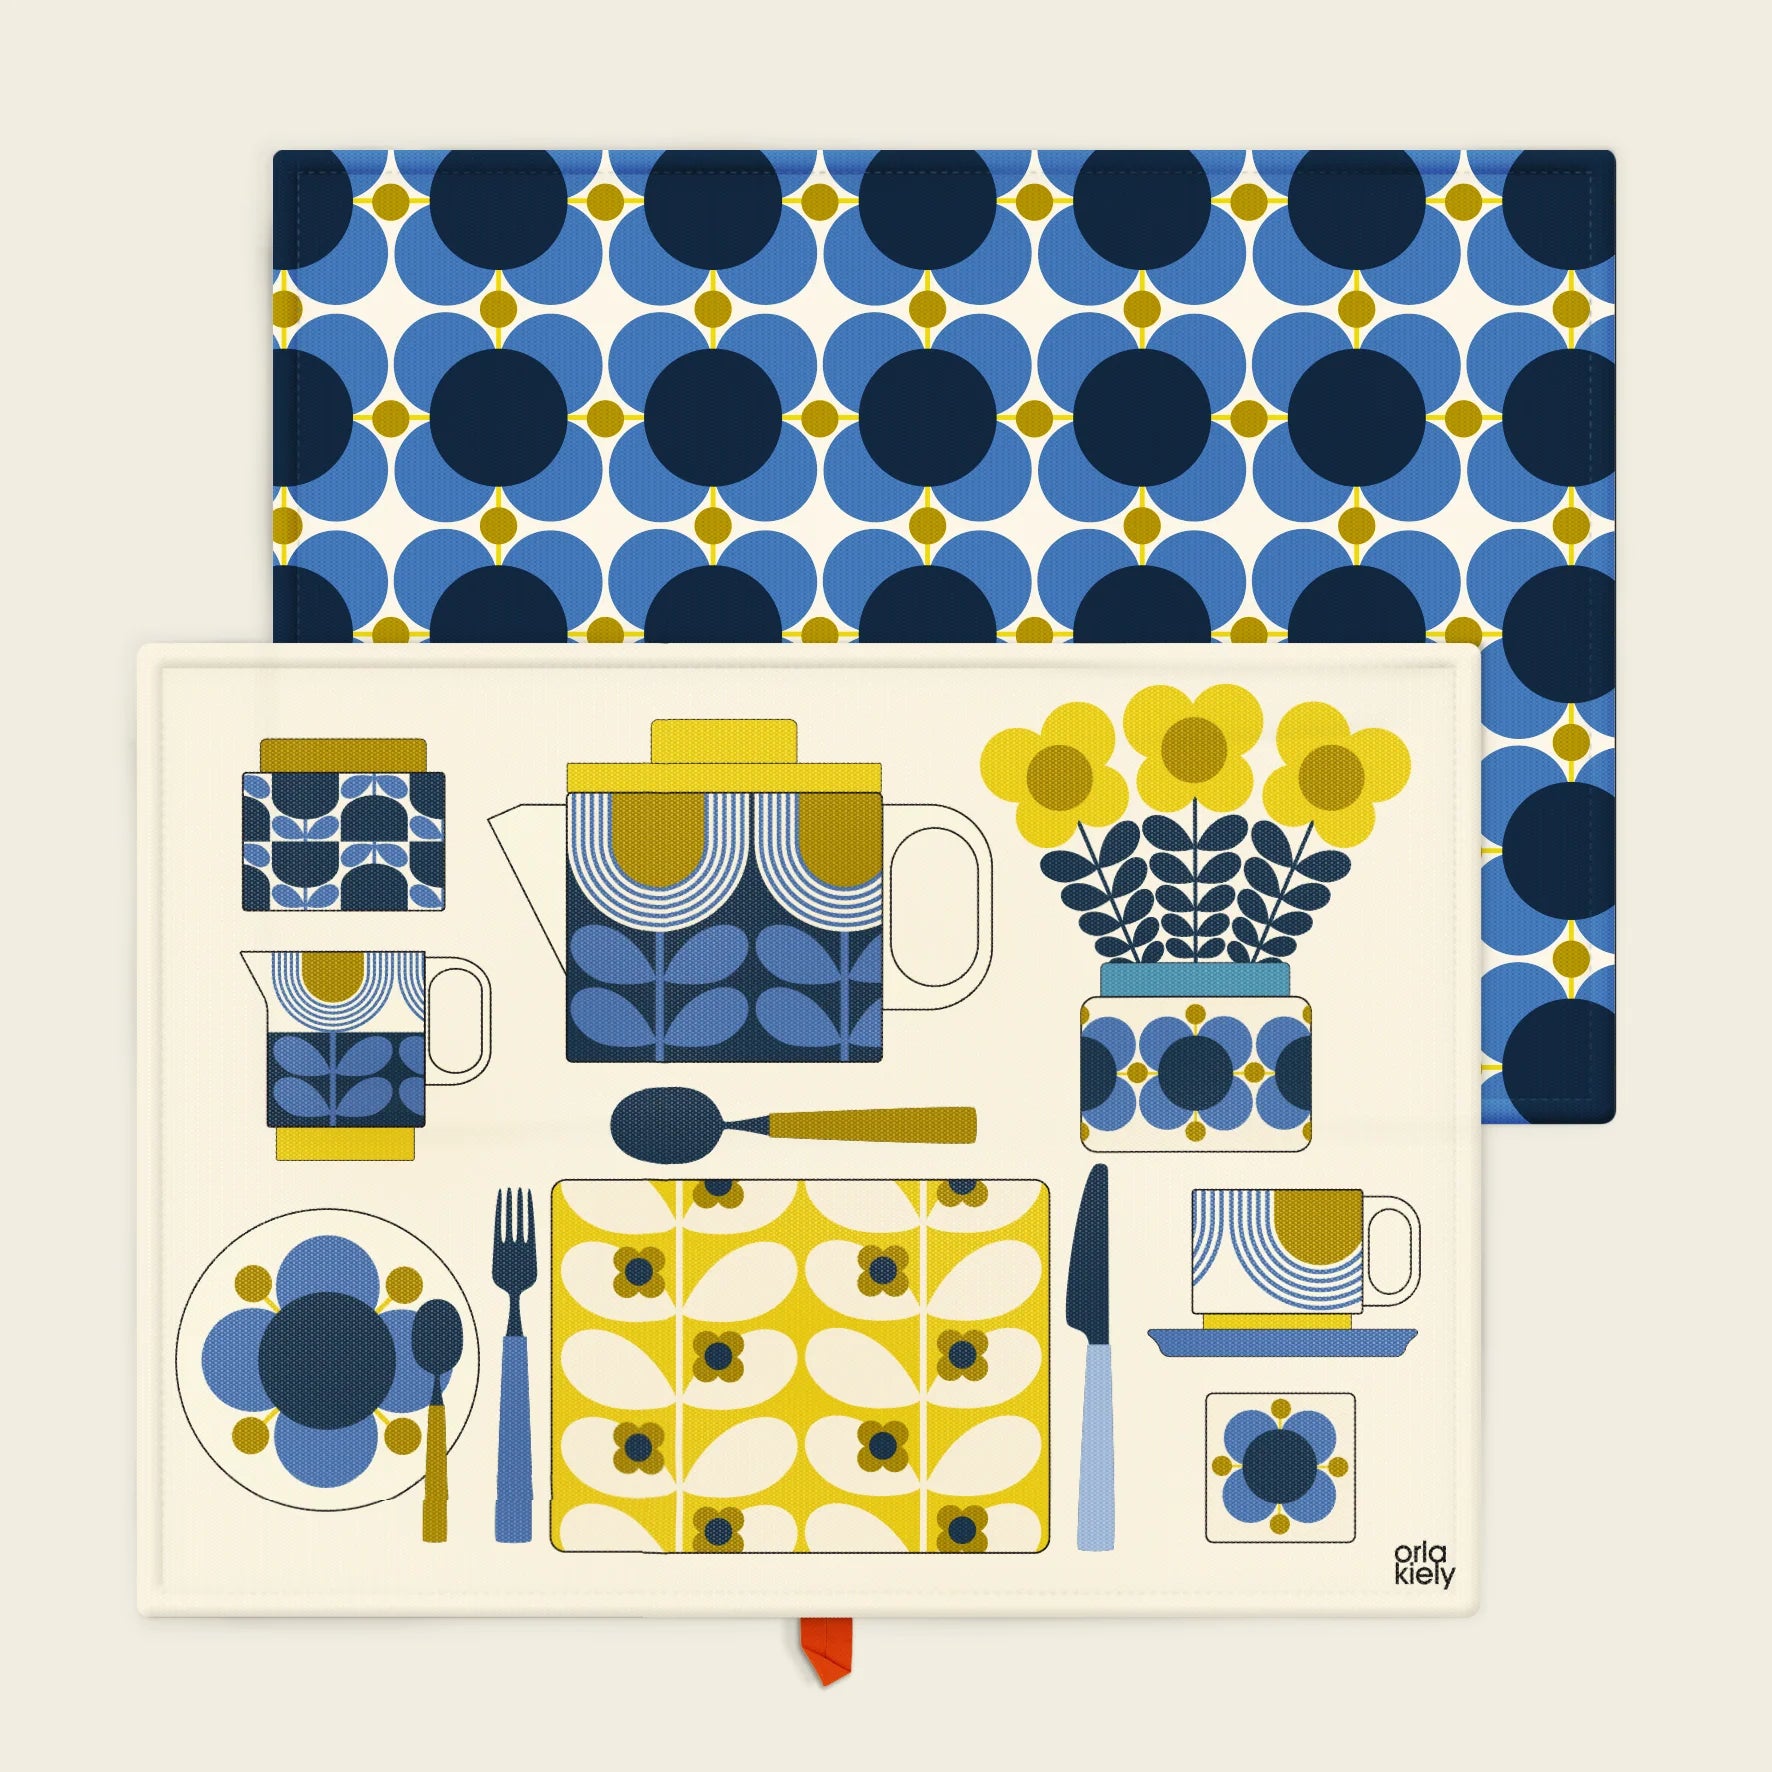 Fab Gifts | Orla Kiely Afternoon Tea Tea Towels Set of 2 by Weirs of Baggot Street